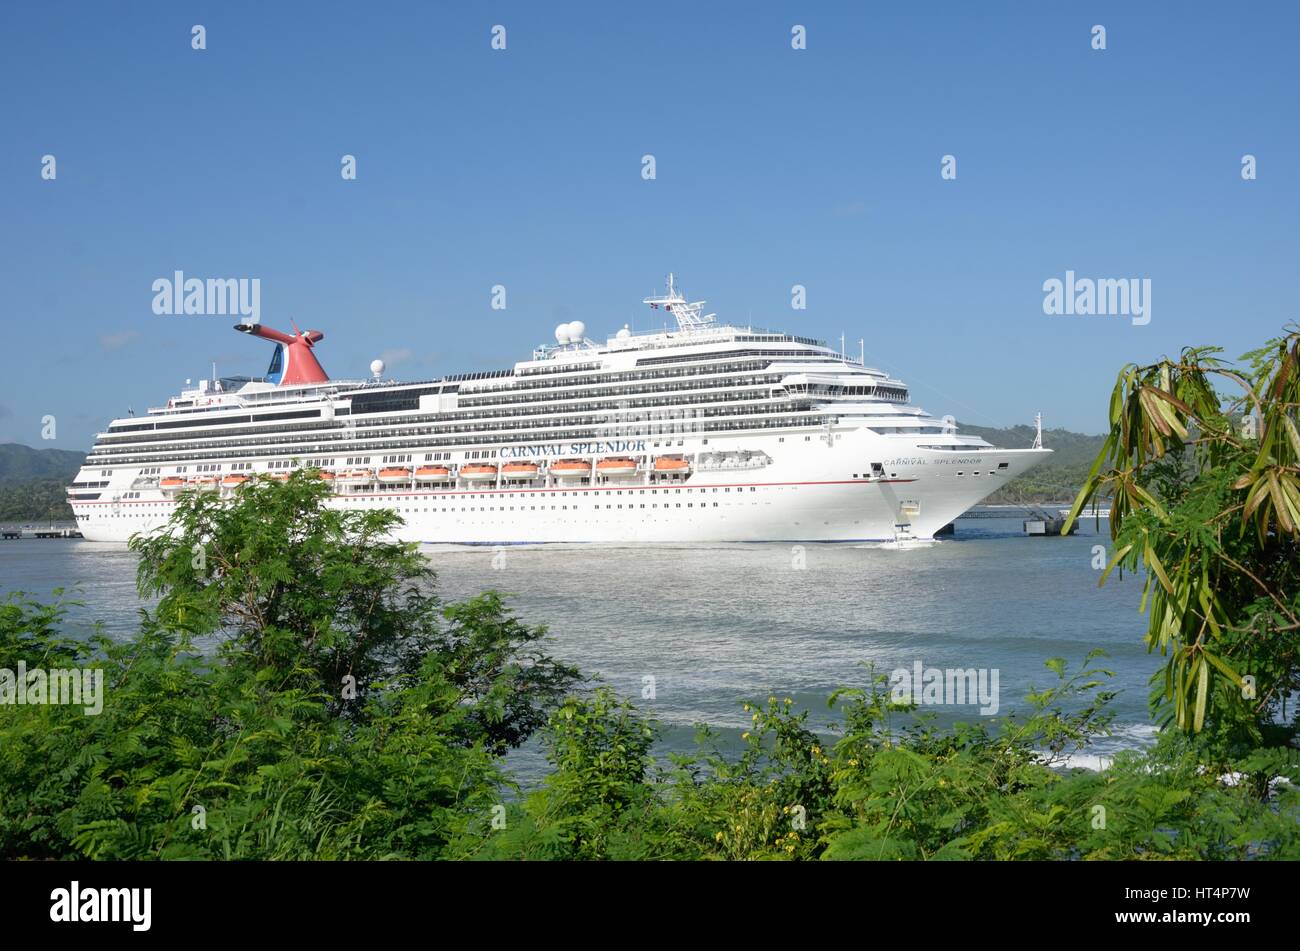 AMBER COVE DOMINICAN REPUBLIC 16 FEBRUARY  2016: Carnival Splendor Cruise ship in port with trees in foreground Stock Photo